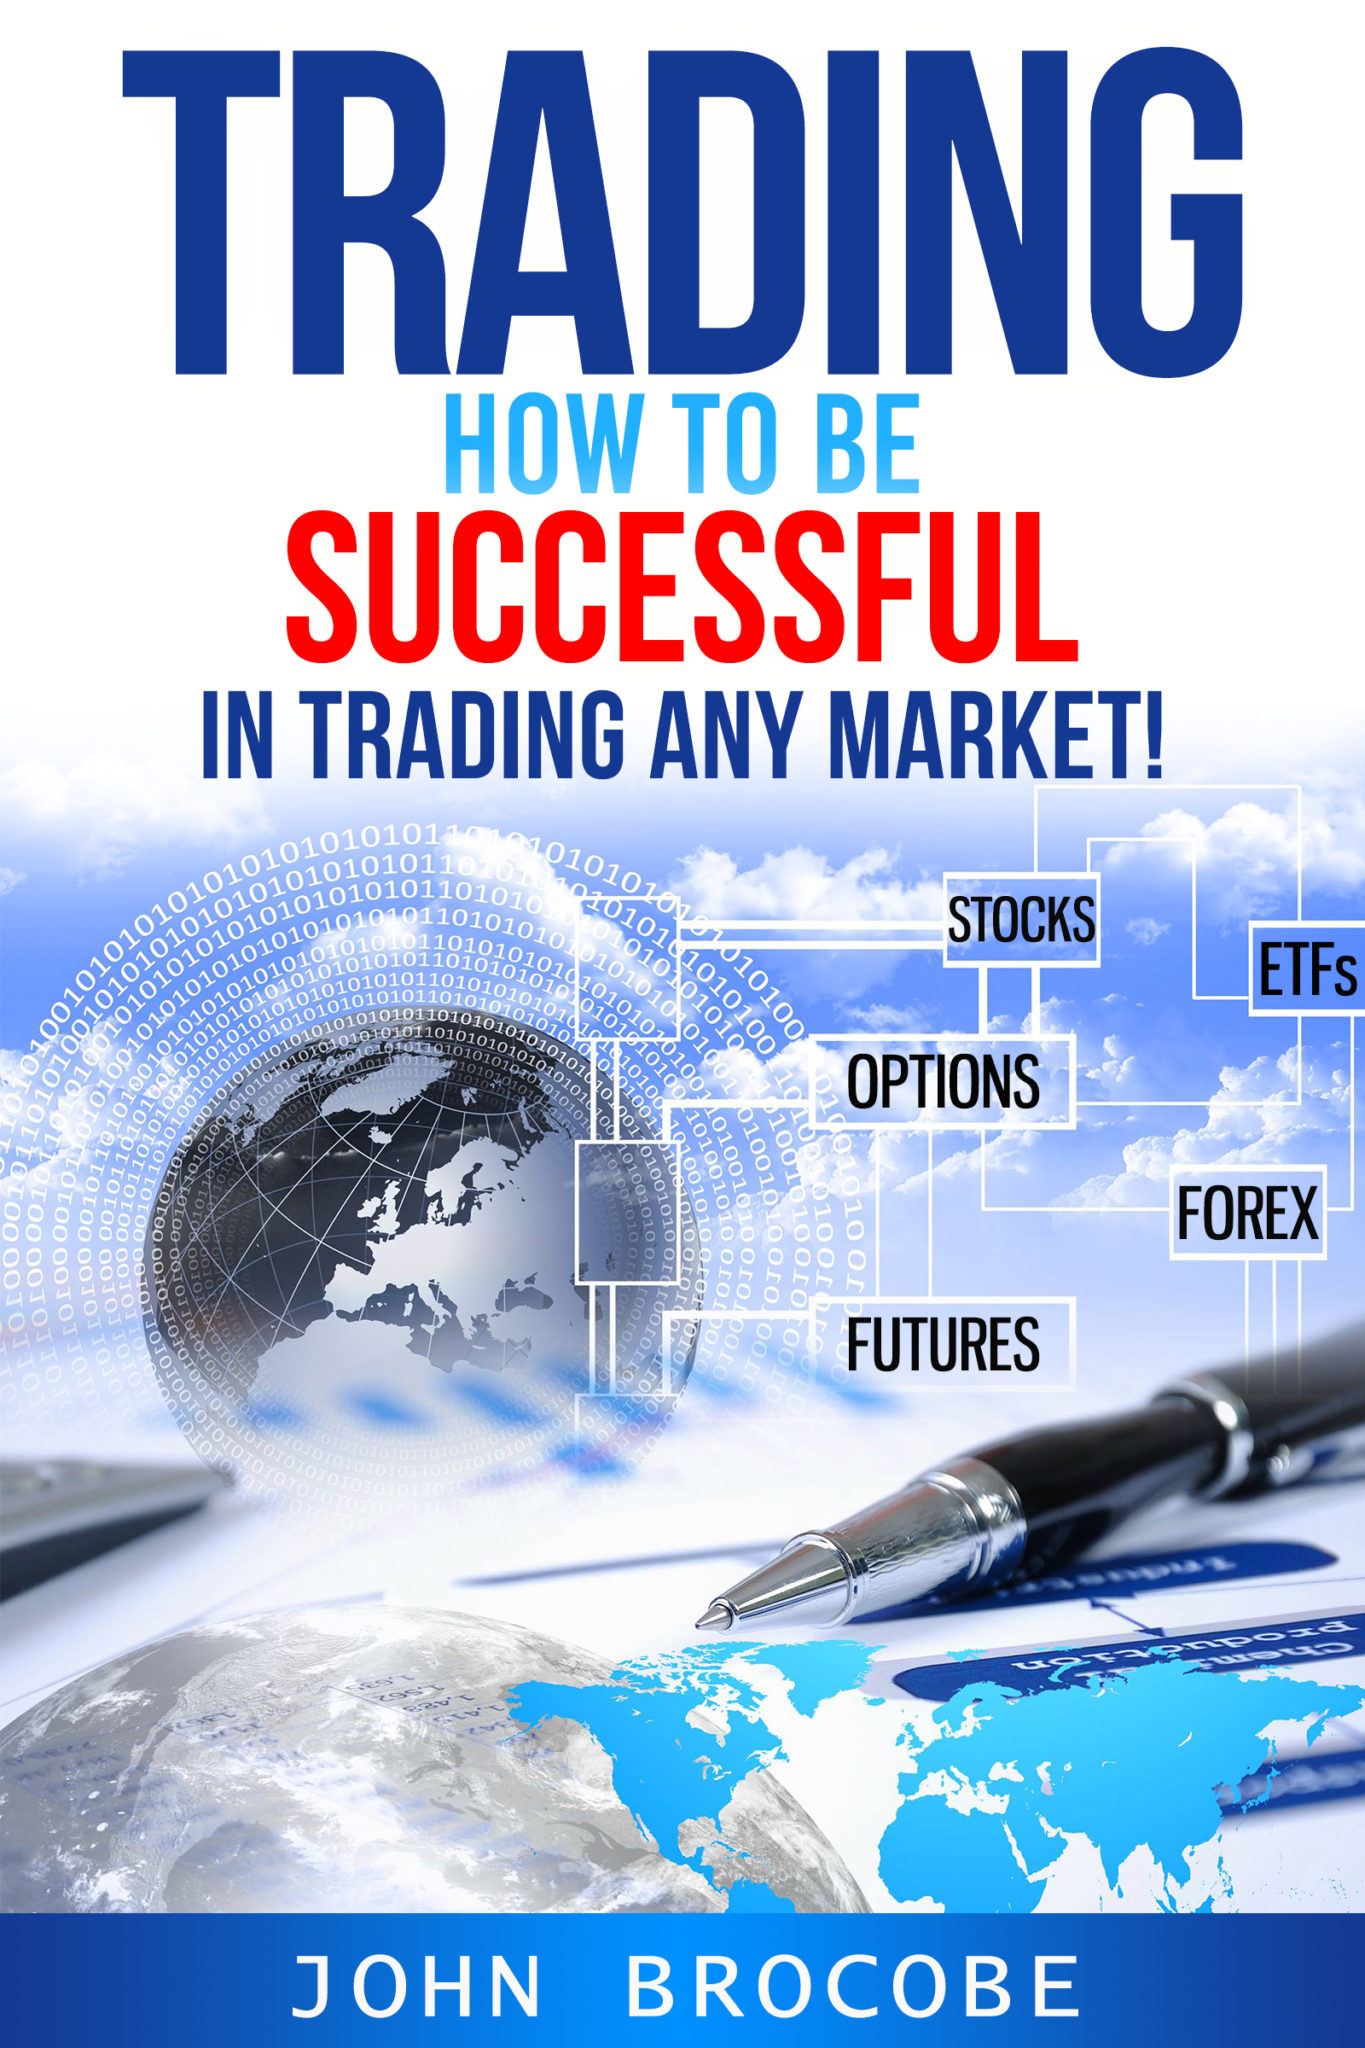 FREE: Trading: How to Be Successful in Trading Any Market!: Stocks, Options, Futures, Forex, ETFs by John Brocobe